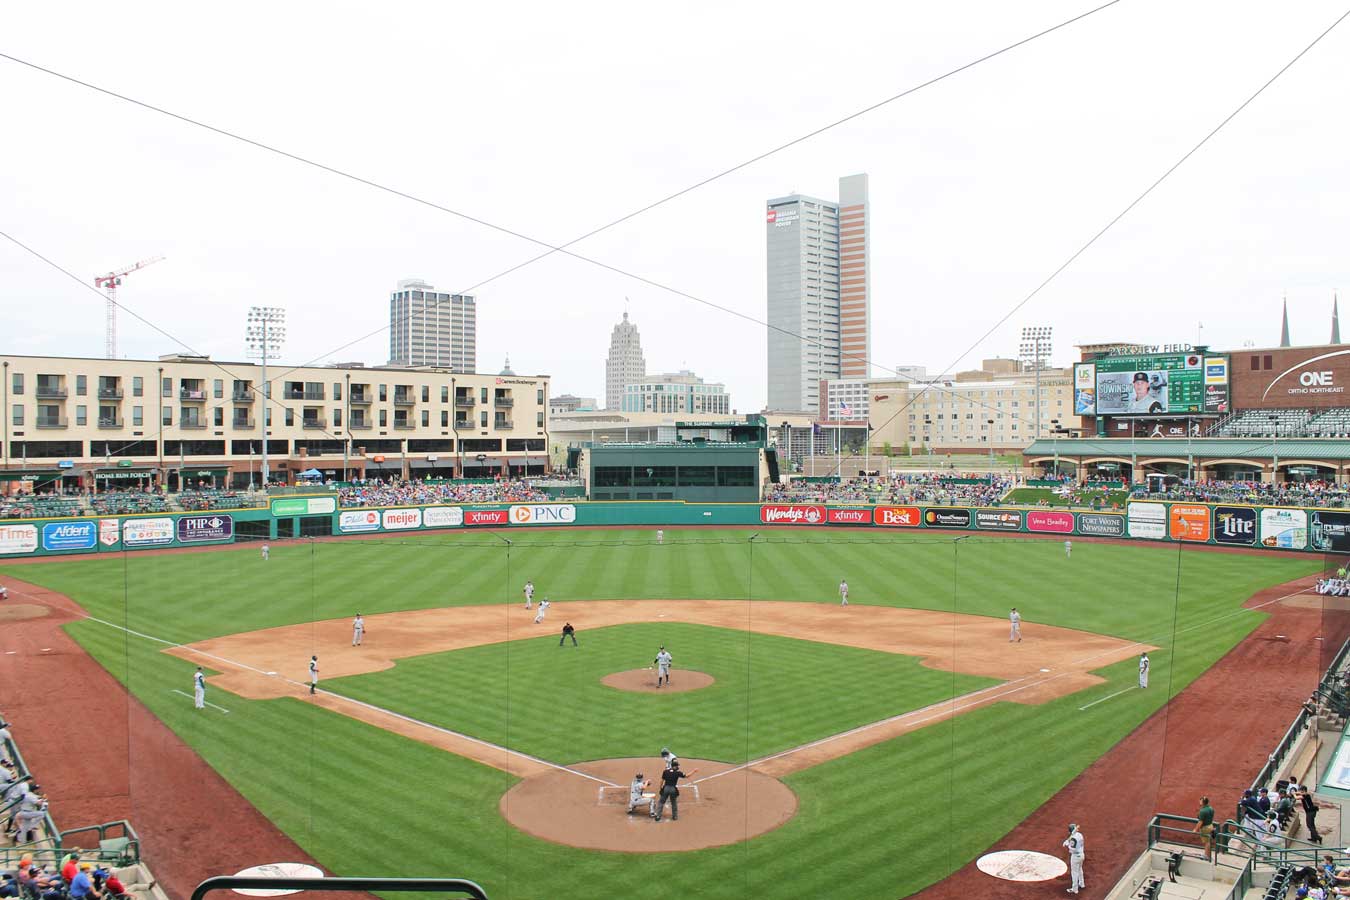 TinCaps Baseball at Parkview Field - Fort Wayne, Indiana (top rated minor league ballpark and amazing food selection!) // The Weekend Getaway You've Overlooked: Visit Fort Wayne, Indiana [via Wading in Big Shoes] // Located equidistantly from Chicago, Cincinnati, and Detroit, Fort Wayne, Indiana is a fun midwest destination that captures a perfect blend of city, nature, and local flavors! See what I experienced on my trip to Fort Wayne and learn what makes Indiana's second-largest city the perfect spot for a weekend getaway.